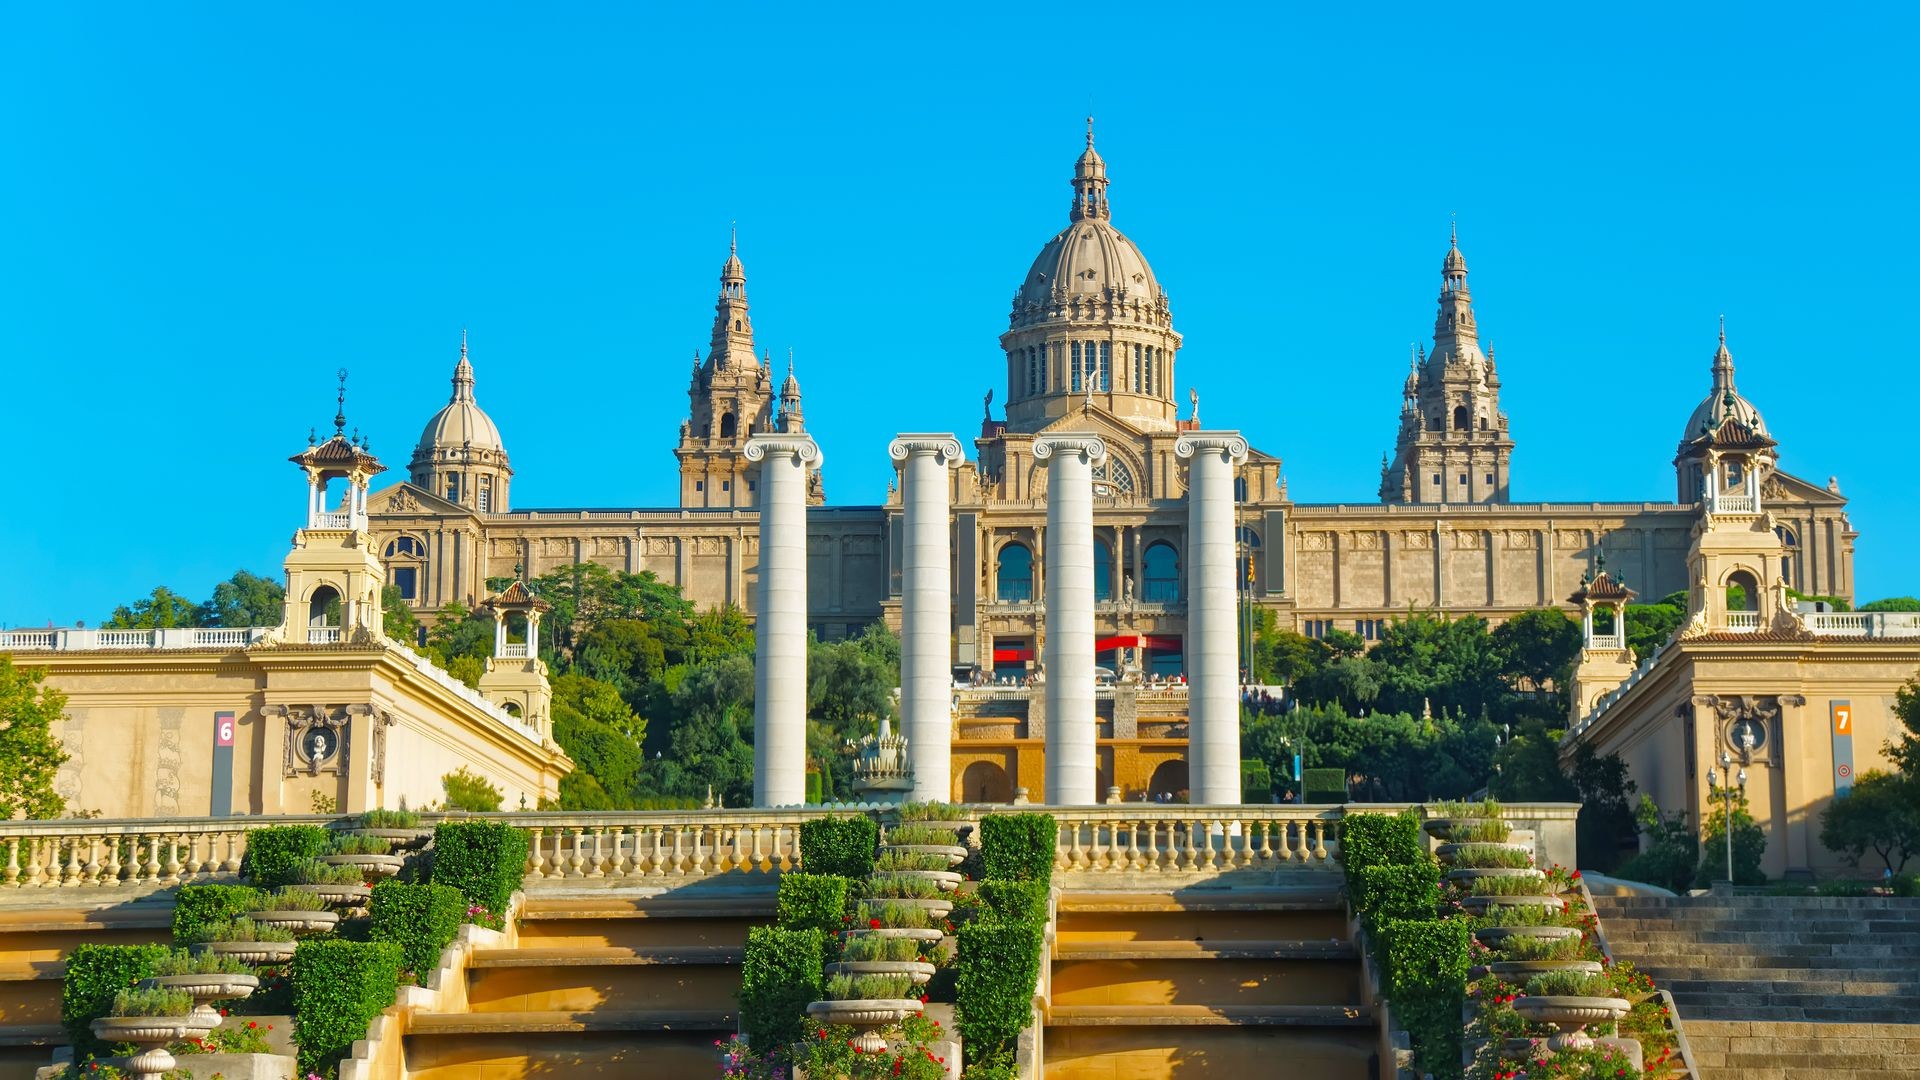 National Palace on the Montjuic hill in Barcelona of Spain. Now it serves as the National Art Museum of Catalonia. It is placed at the foot of Montjuic mountain